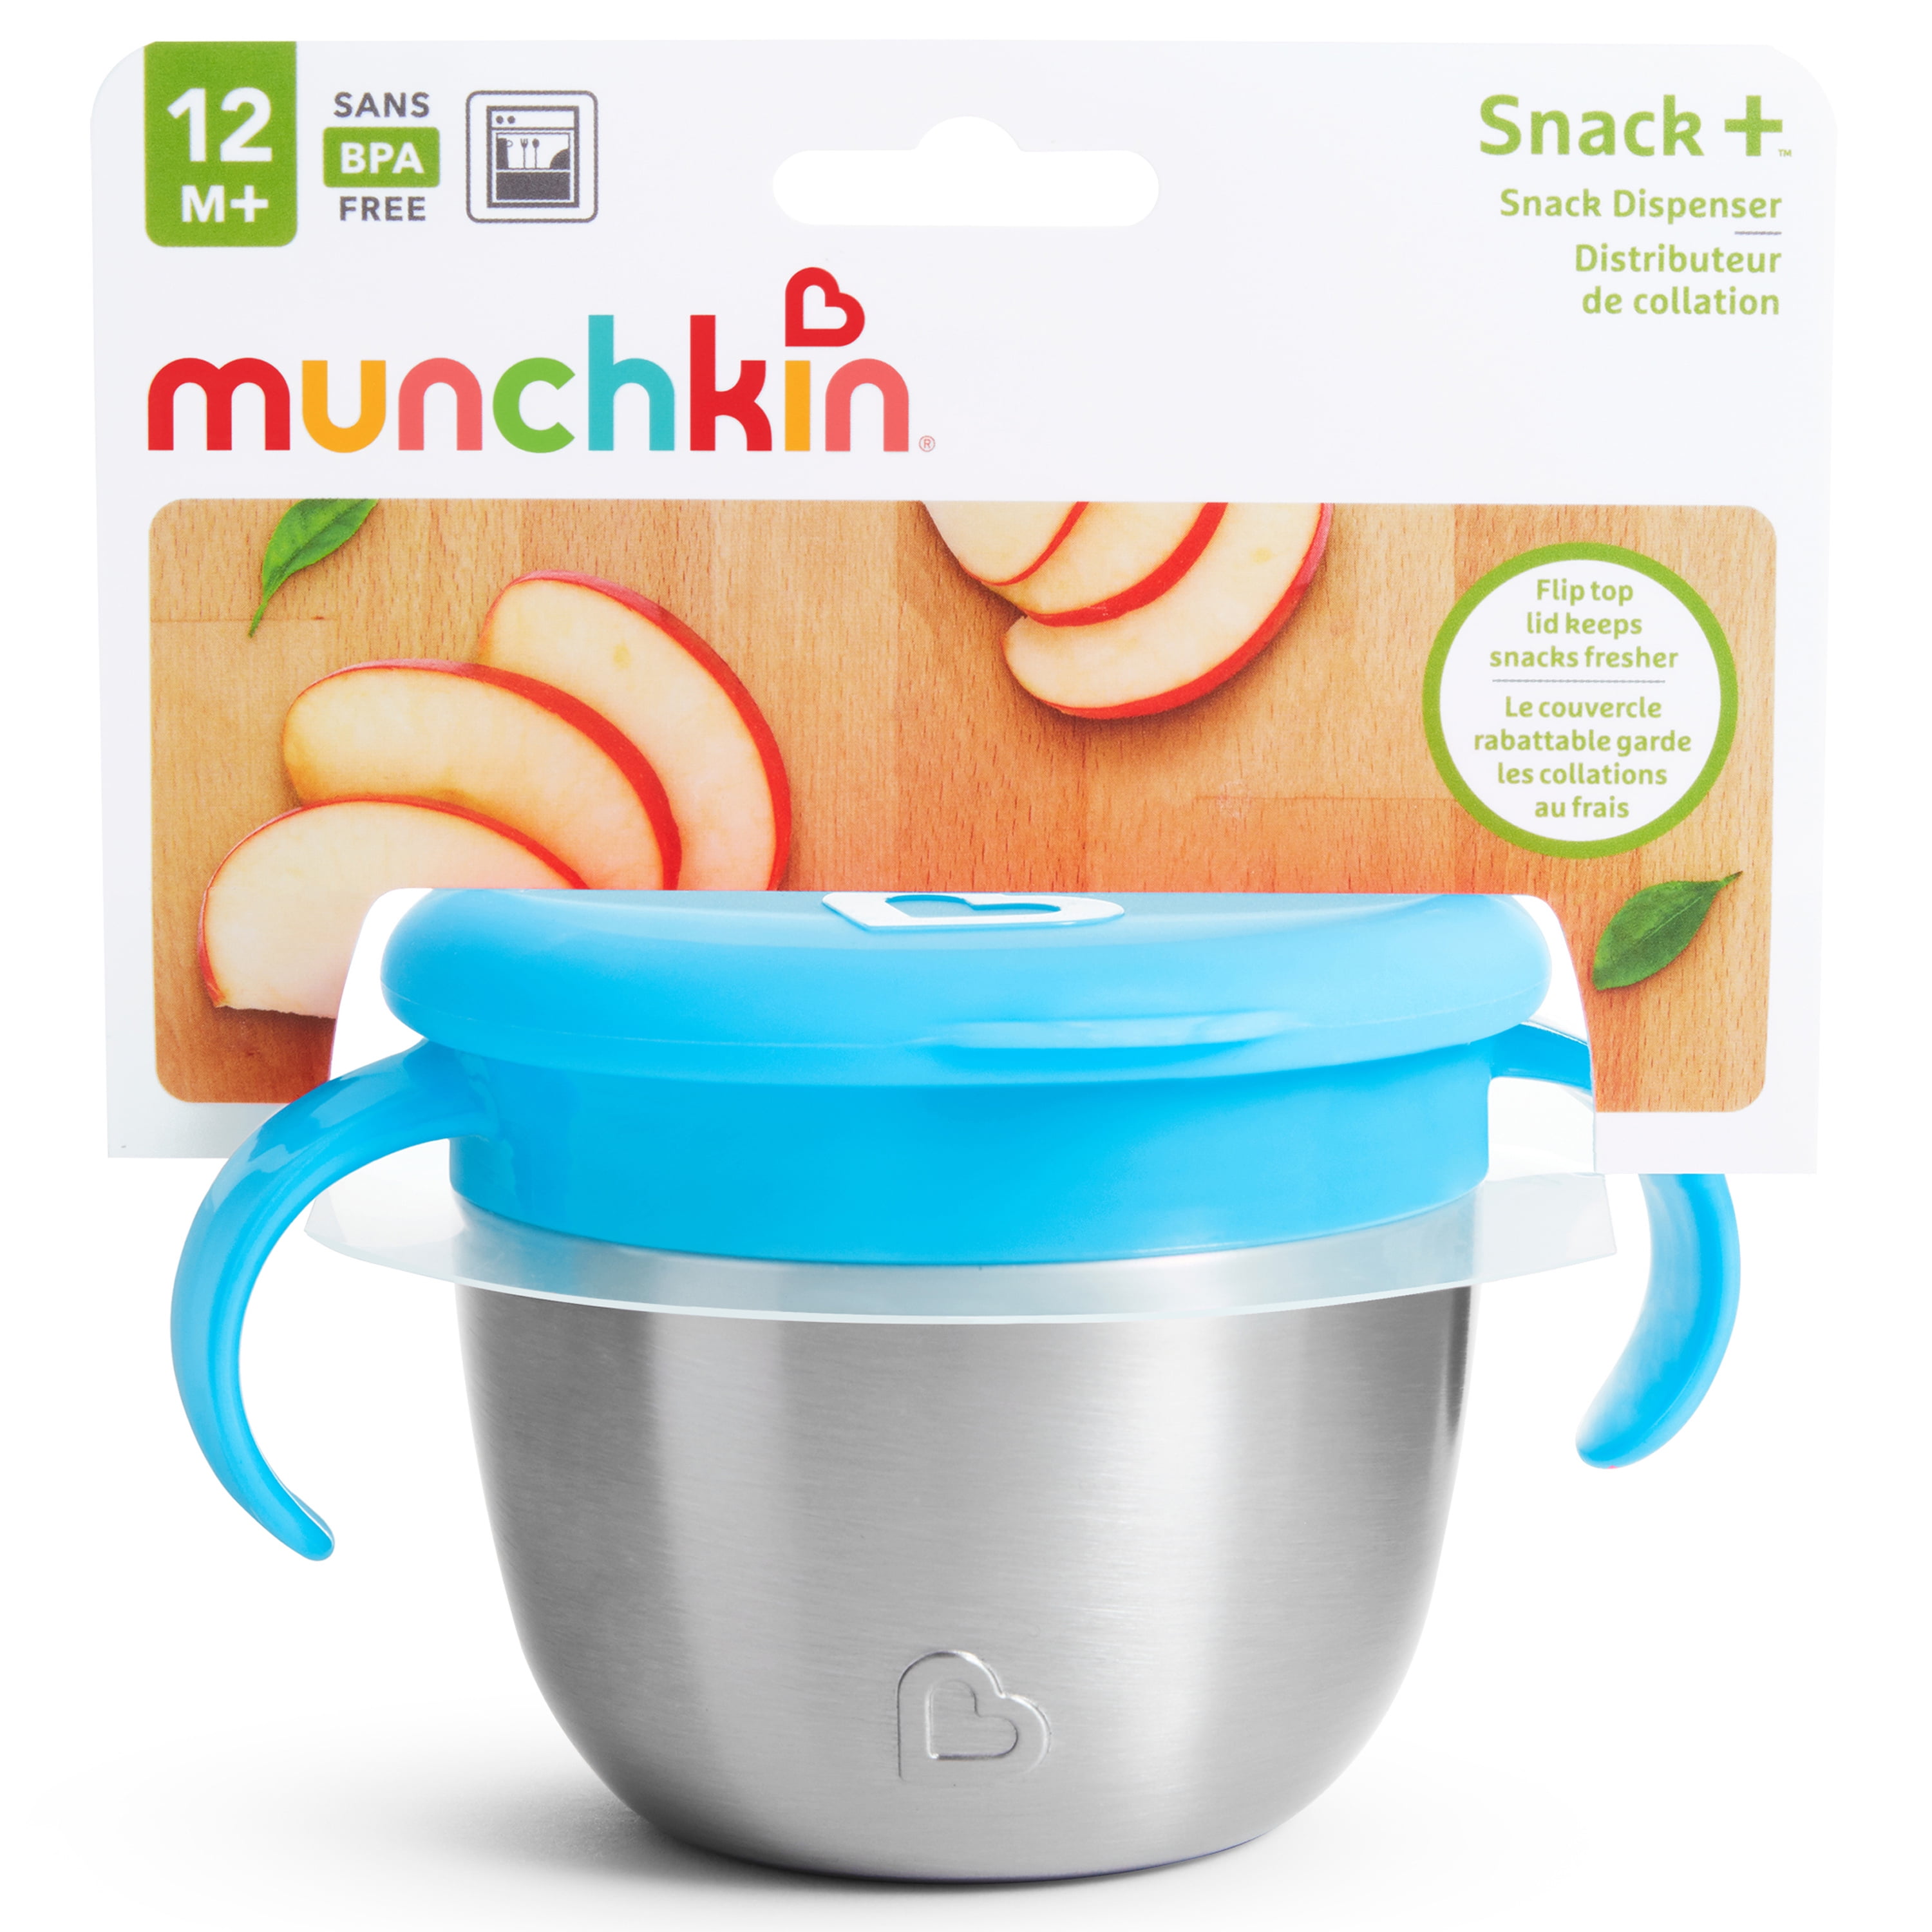 Munchkin® Snack™ Catcher Toddler Snack Cups, 2 Pack, Blue/Green